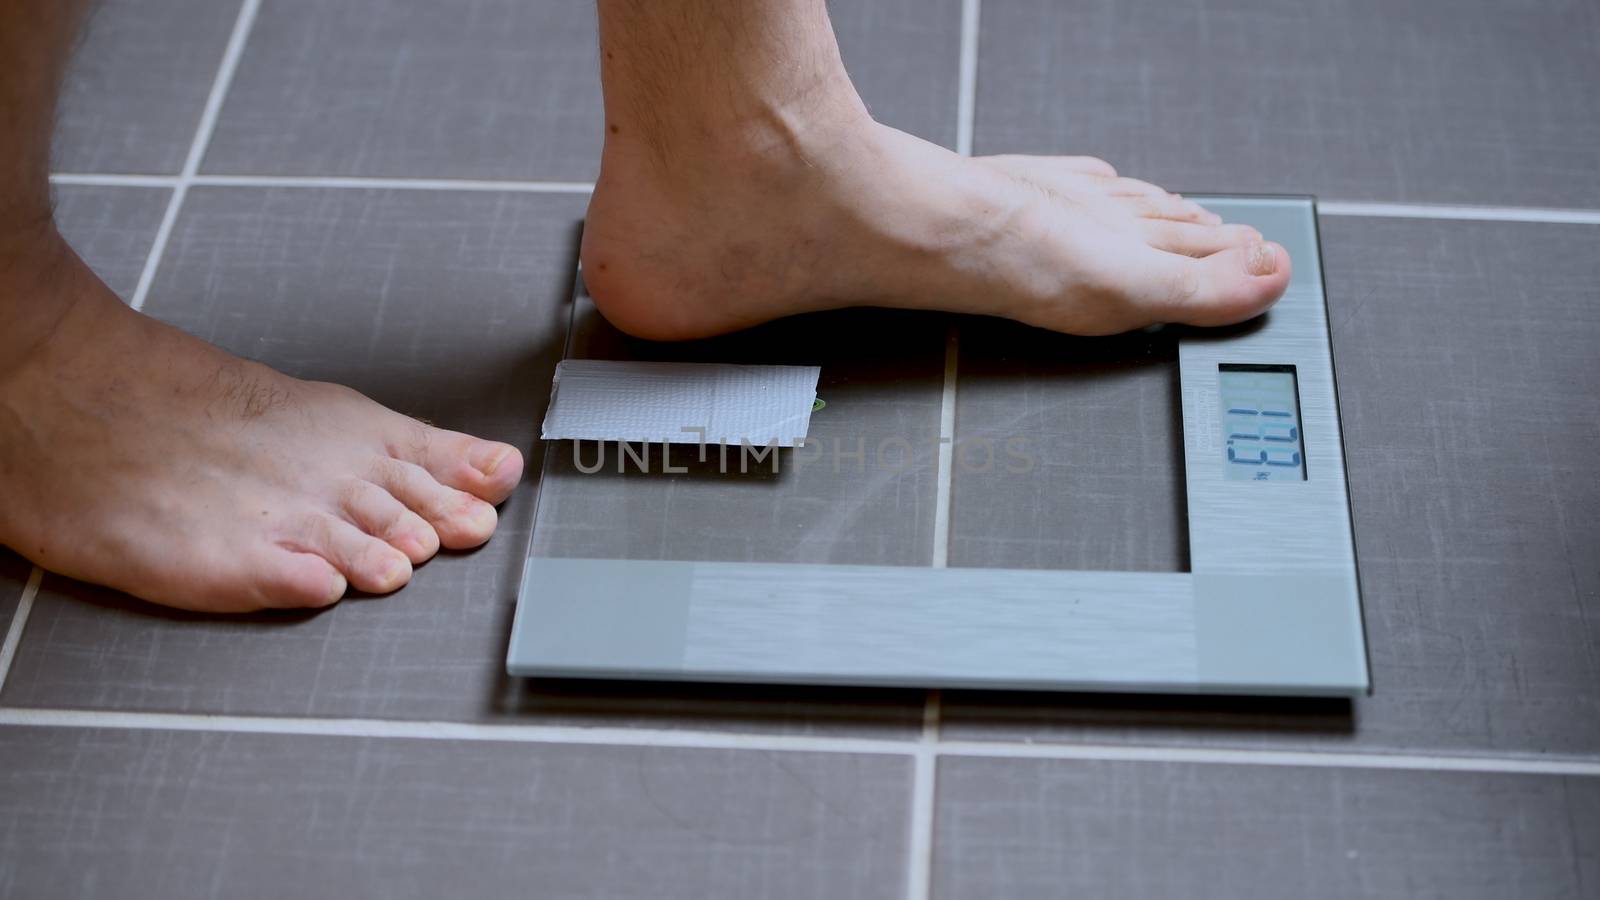 Male feet on glass scales, men's diet, body weight, close up, man stepping up on scales, side view